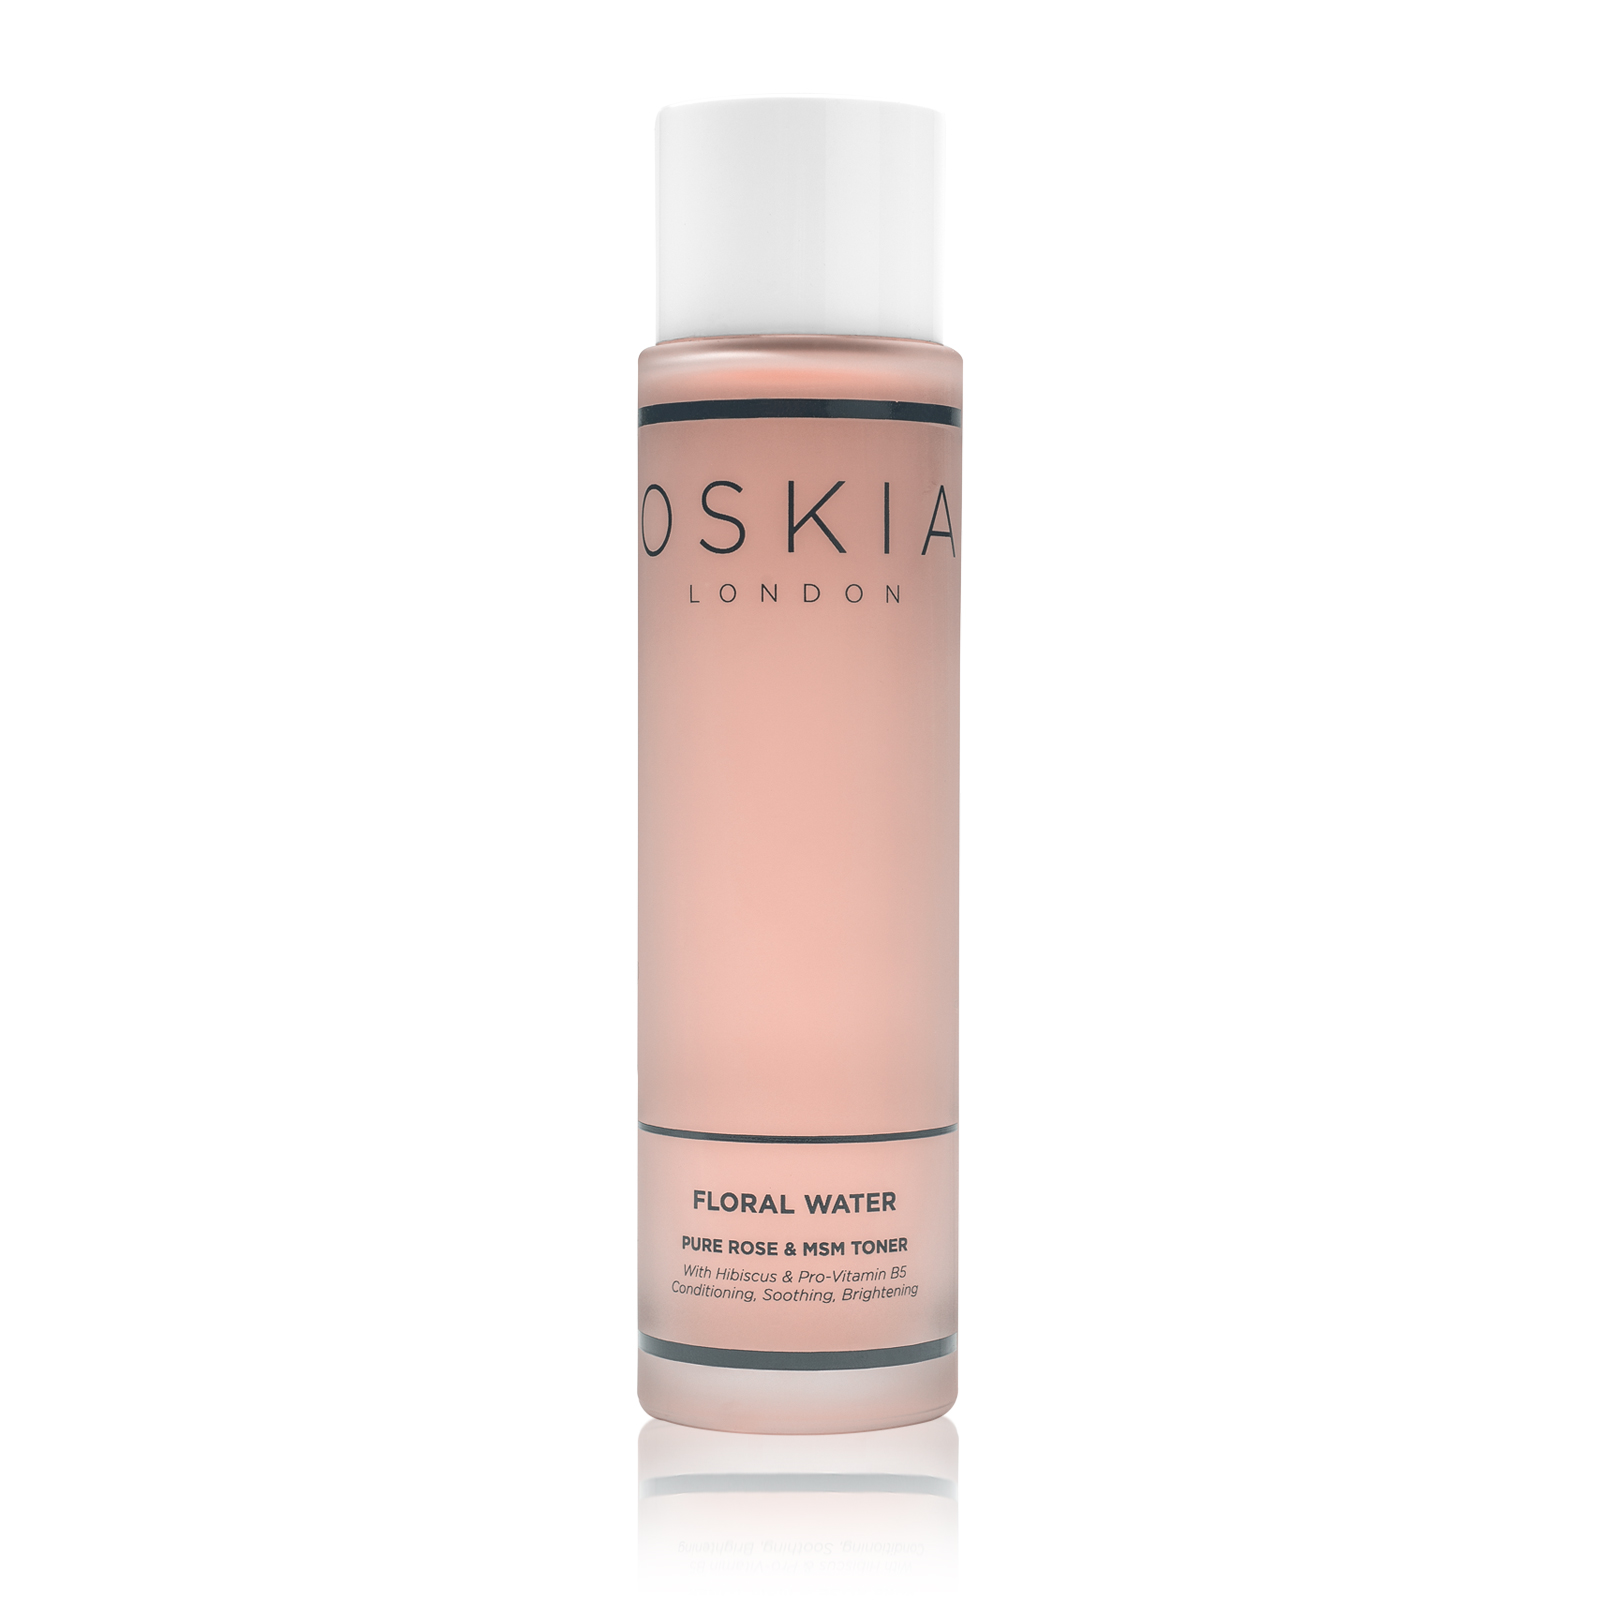 Oskia Floral Water Pure Rose & MSM Toner 150 ml.